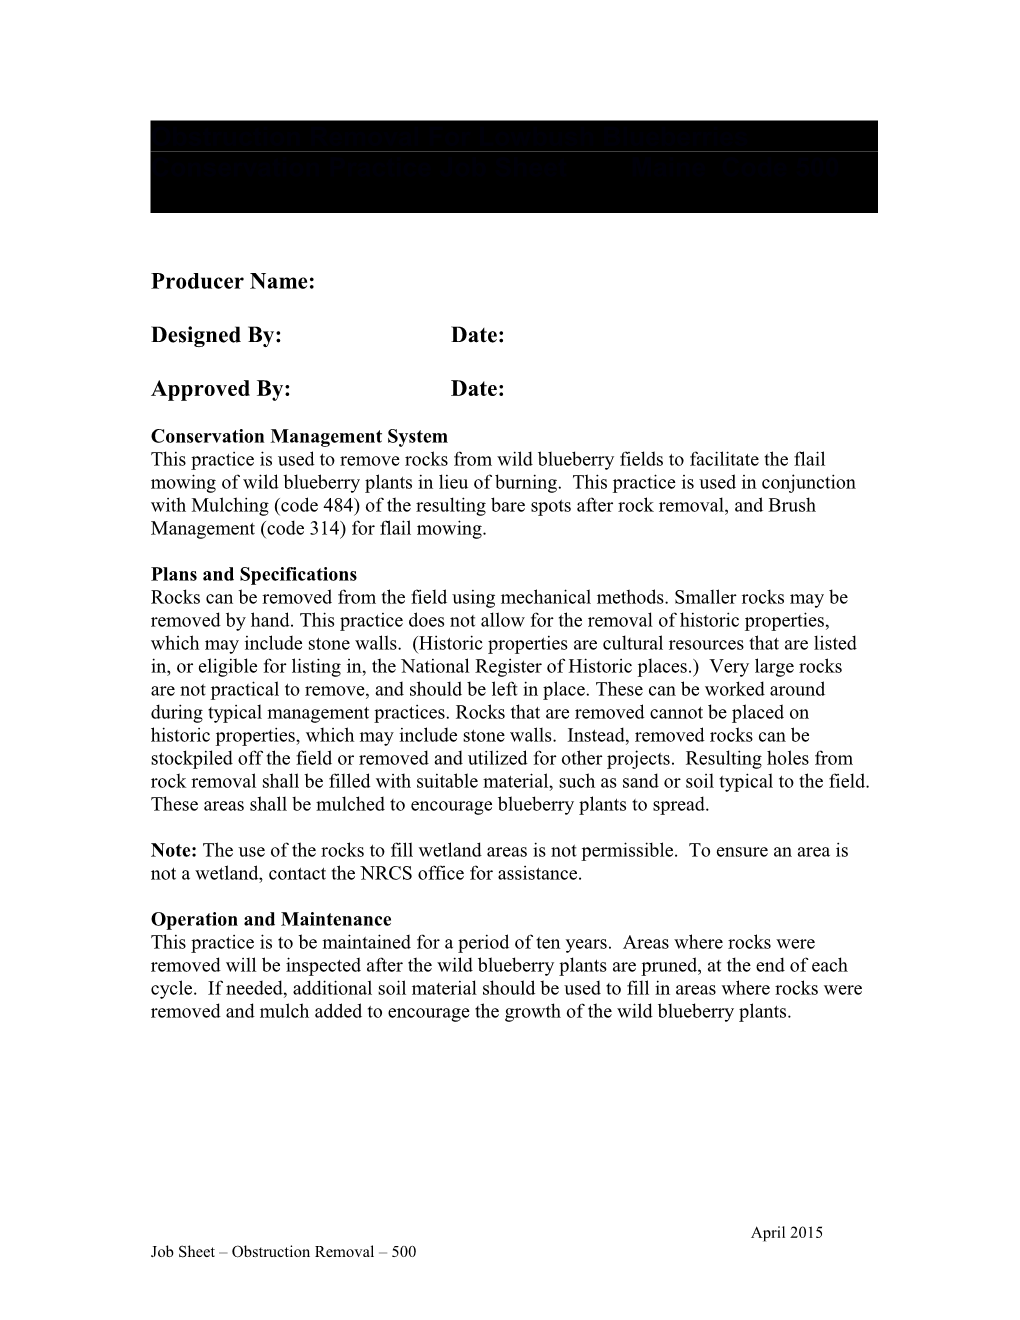 Job Sheet for Wild Blueberry Conservation Practices Obstruction Removal Code 500